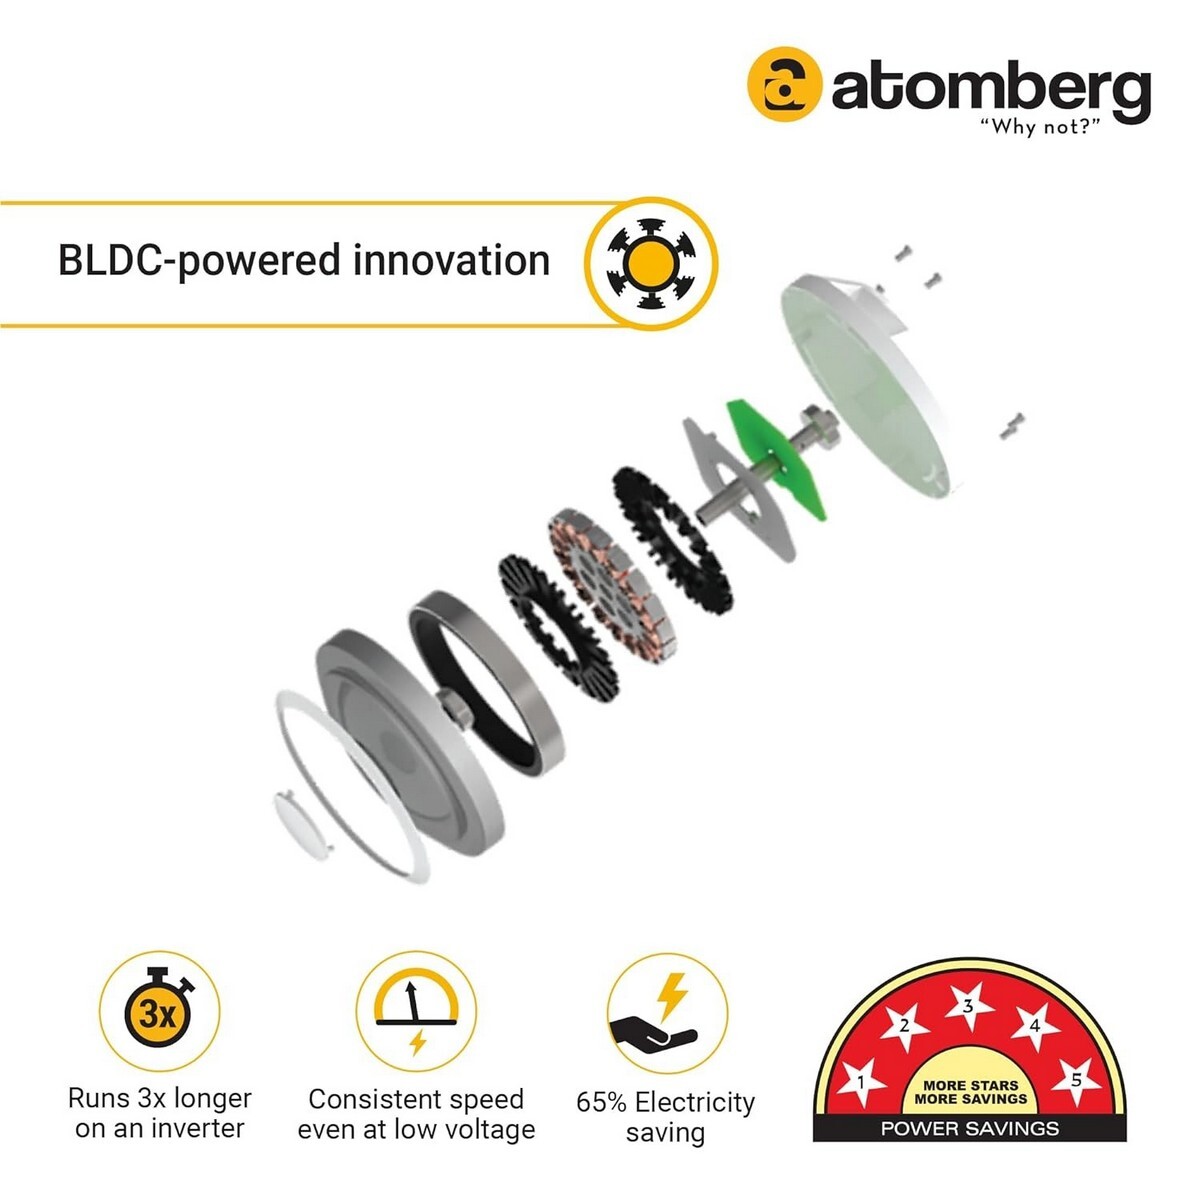 Atomberg Energy Efficient Ceiling Fan with BLDC Motor and Remote Ikano White